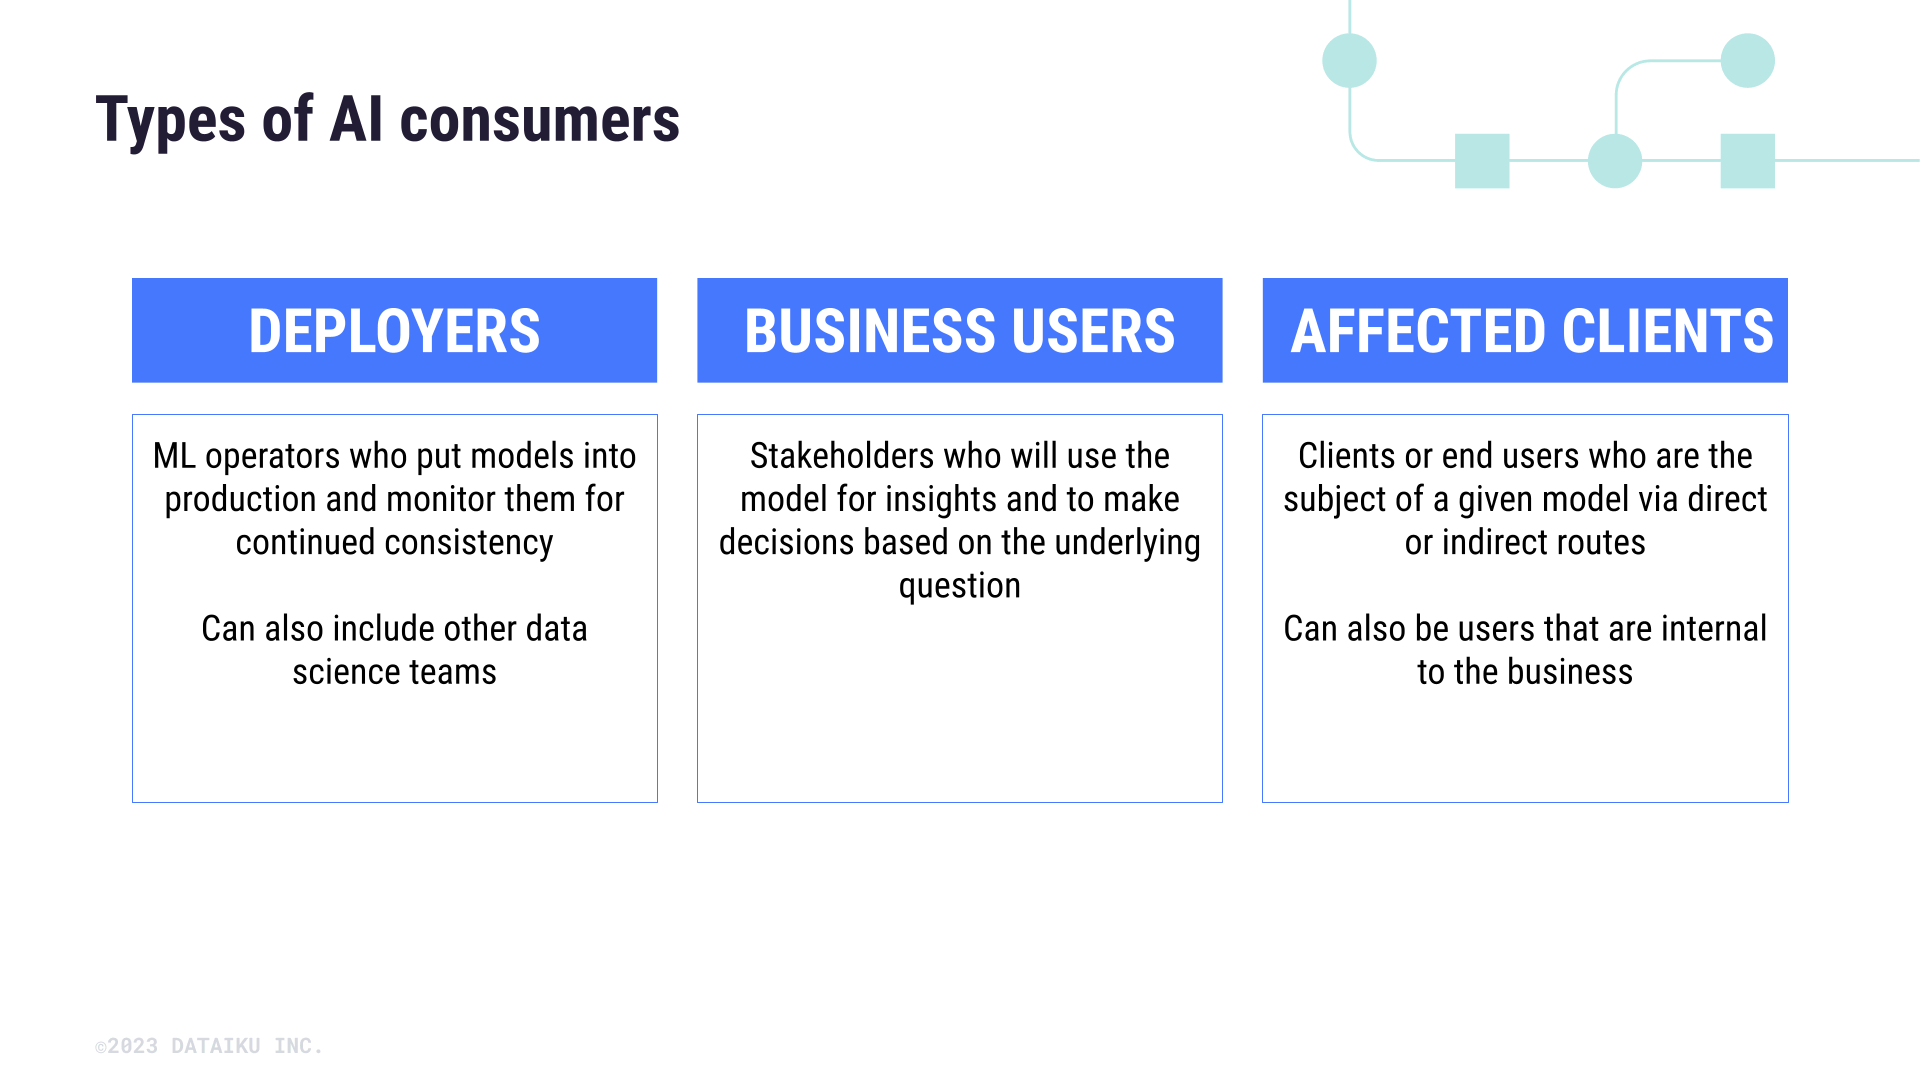 Three types of ai consumers: deployers, business users, and affected clients.